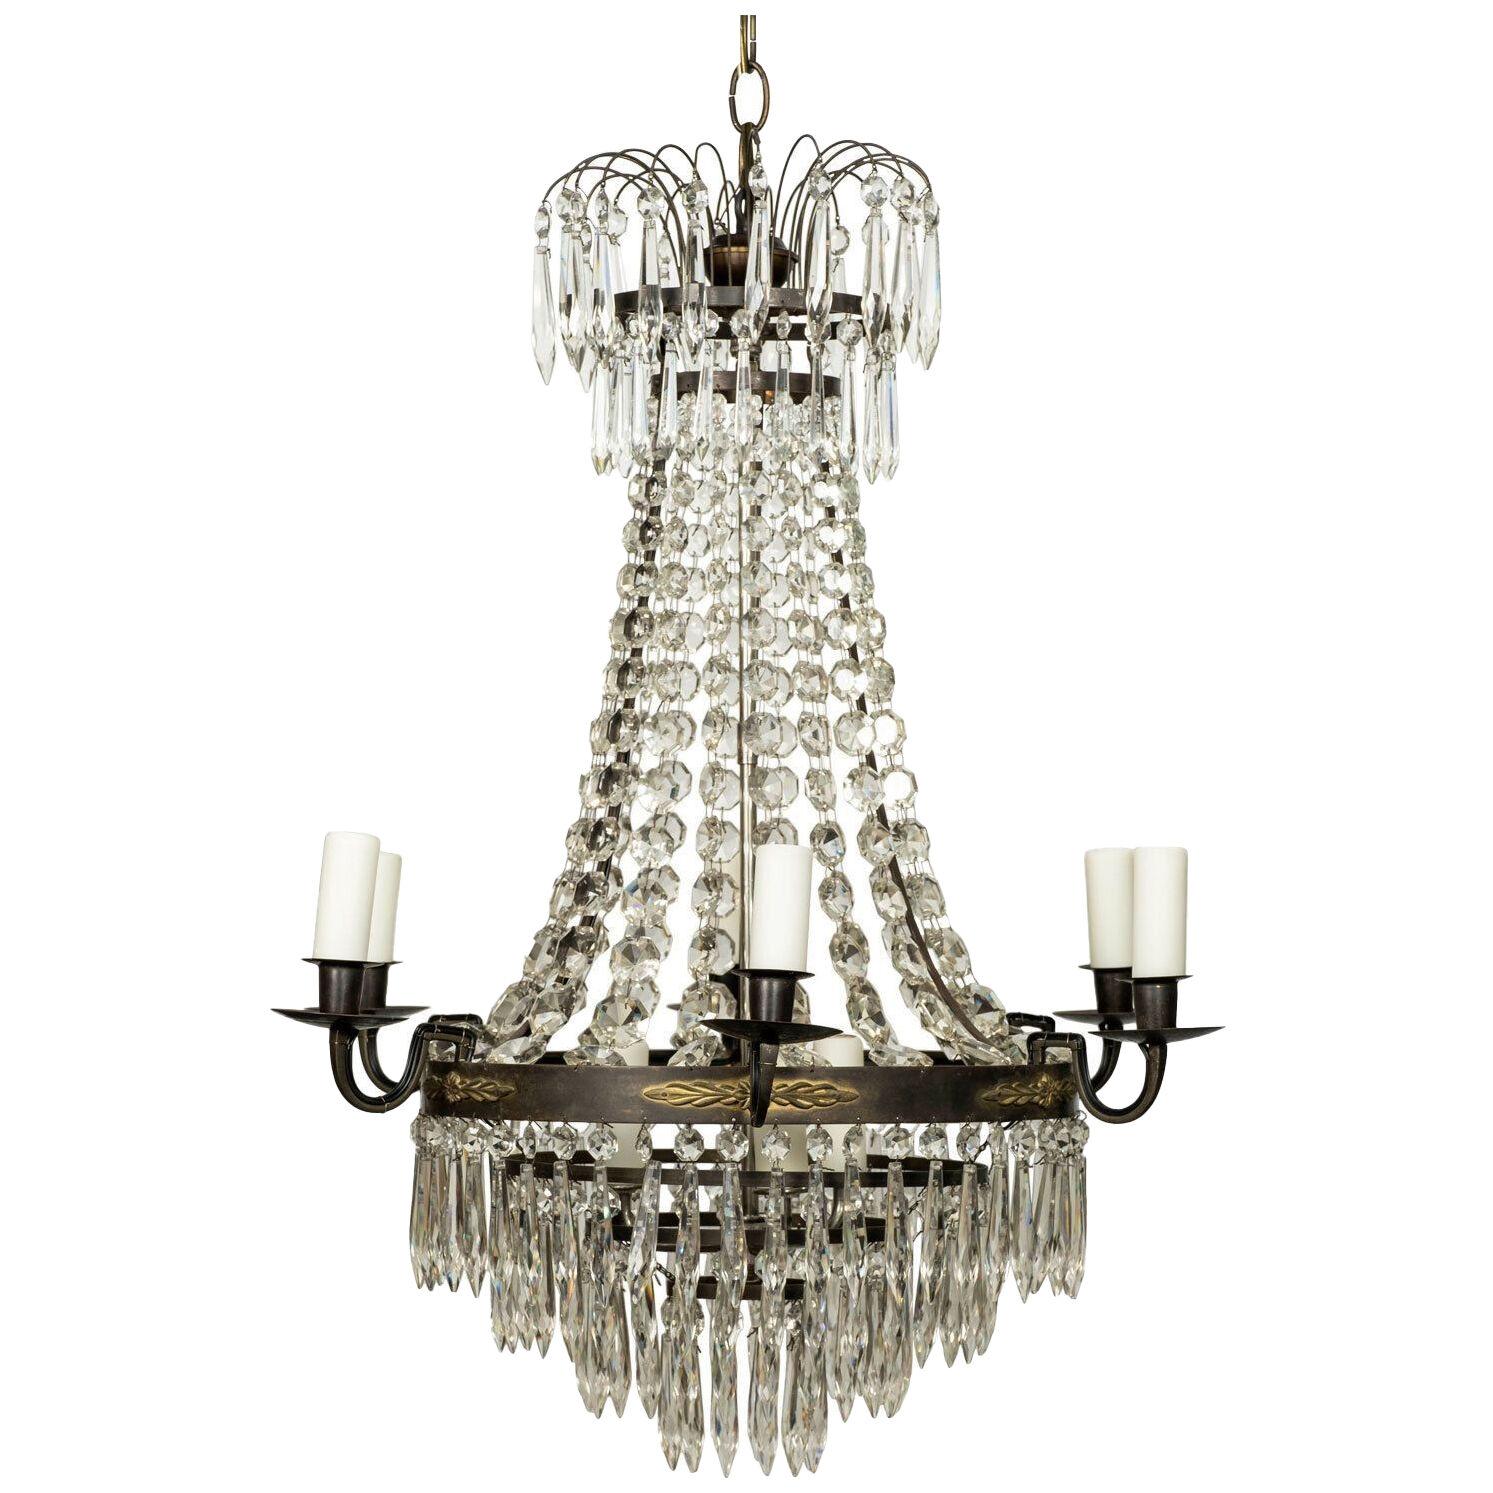 Neoclassical Swedish Gilt-Brass and Crystal Chandelier